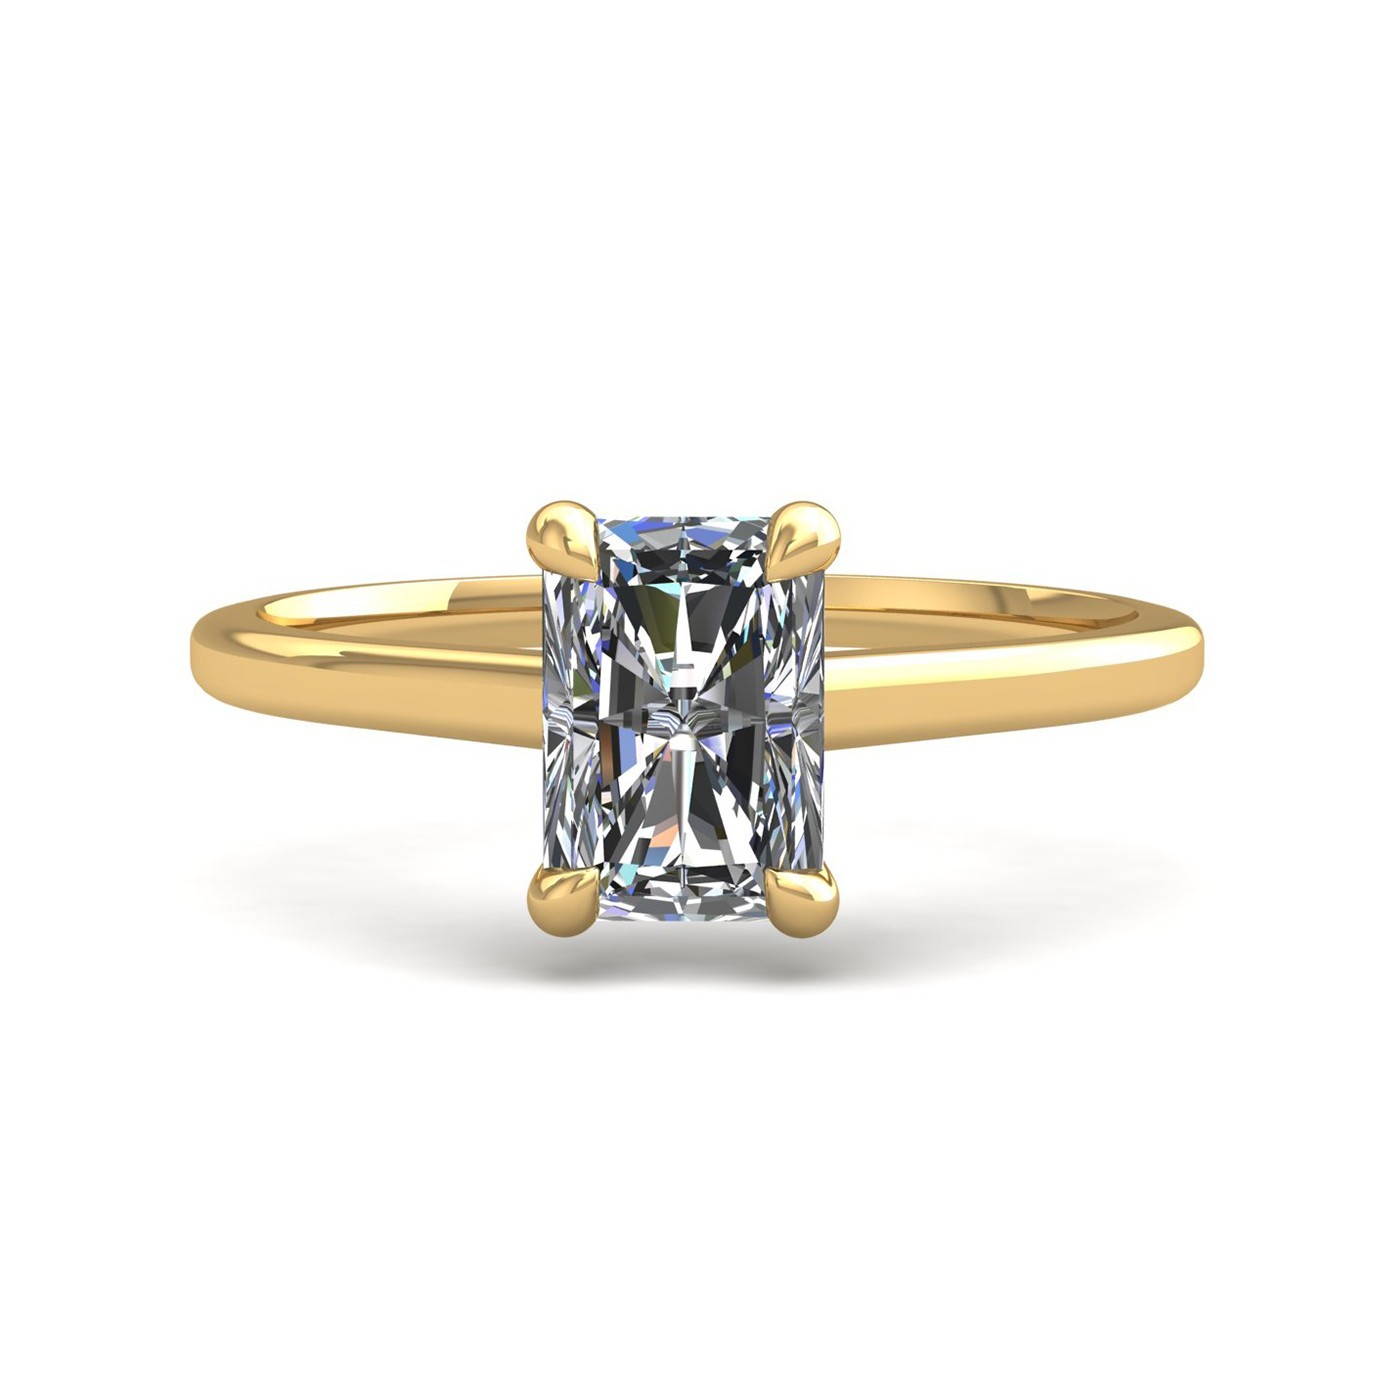 18k yellow gold  1,50 ct 4 prongs solitaire radiant cut diamond engagement ring with whisper thin band Photos & images